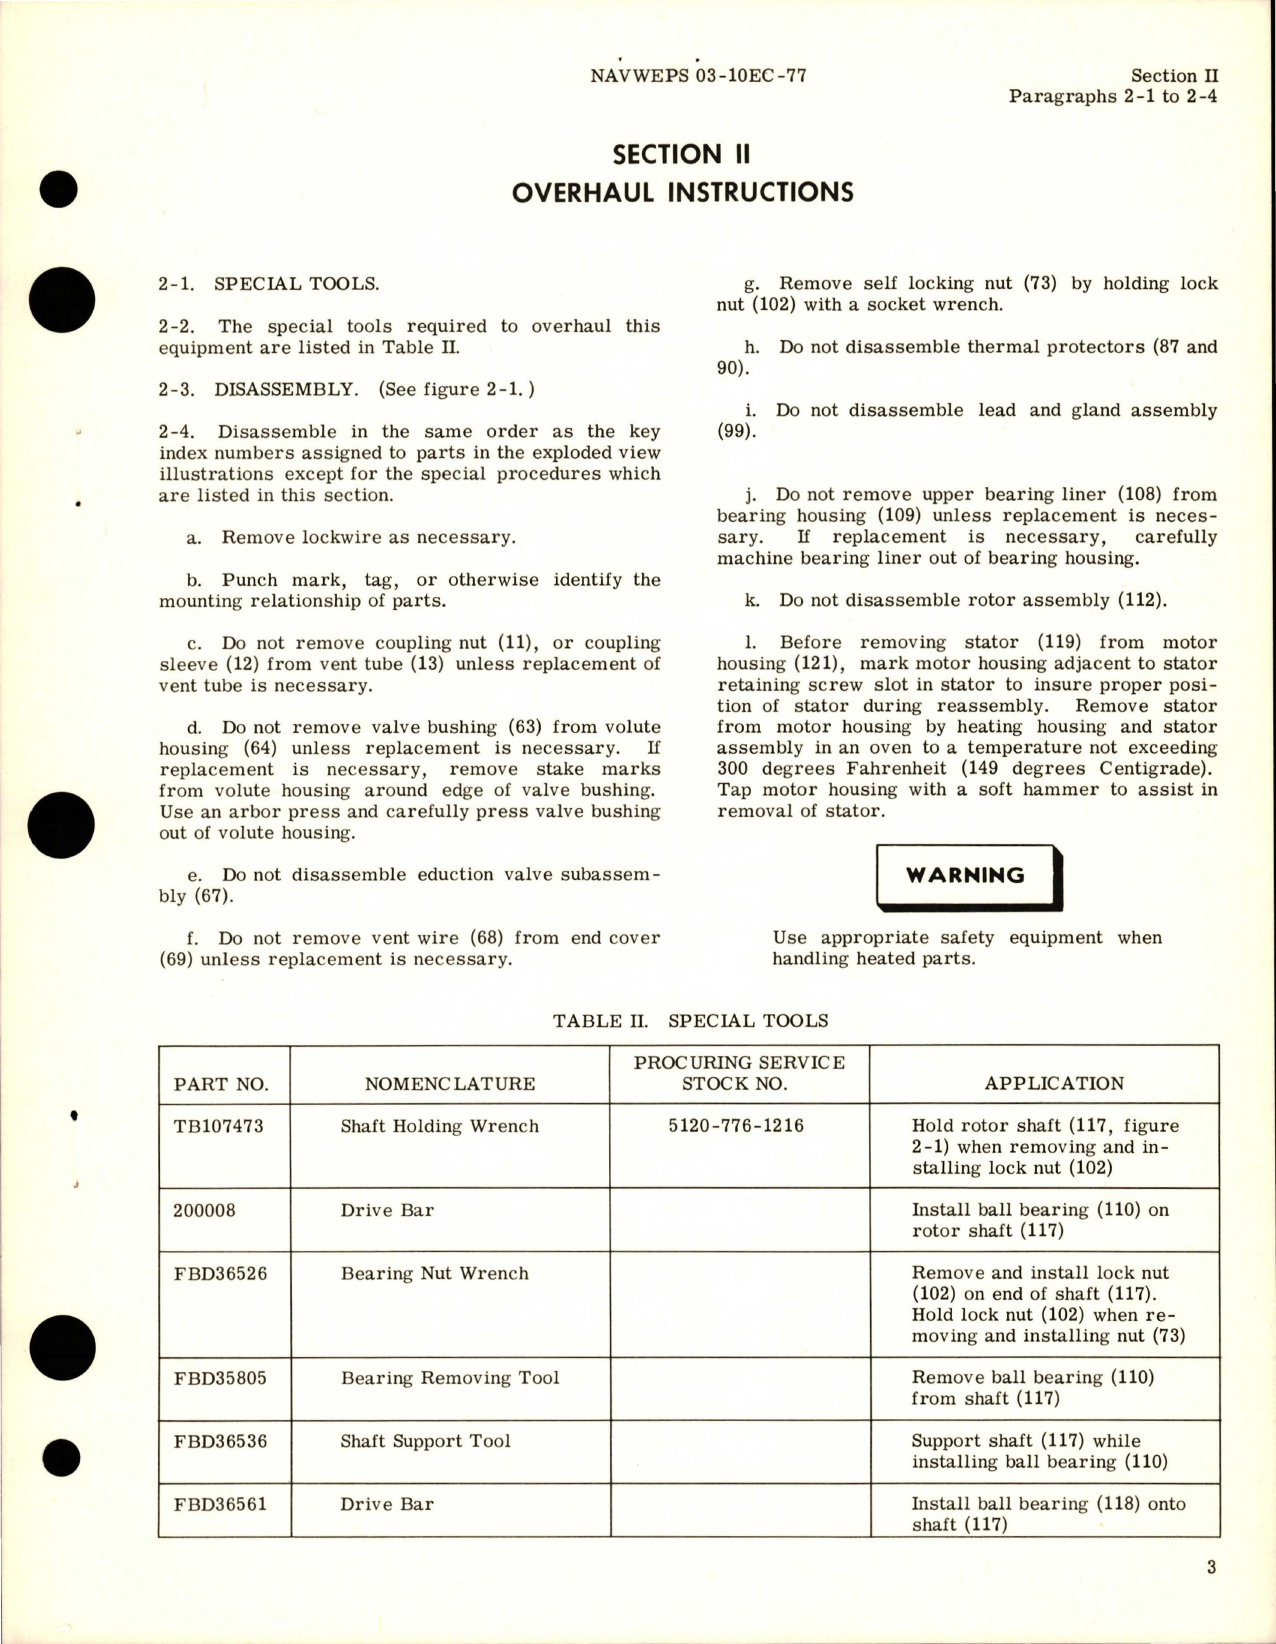 Sample page 7 from AirCorps Library document: Overhaul Instructions for Fuel Booster Pump - Model TB131300-3